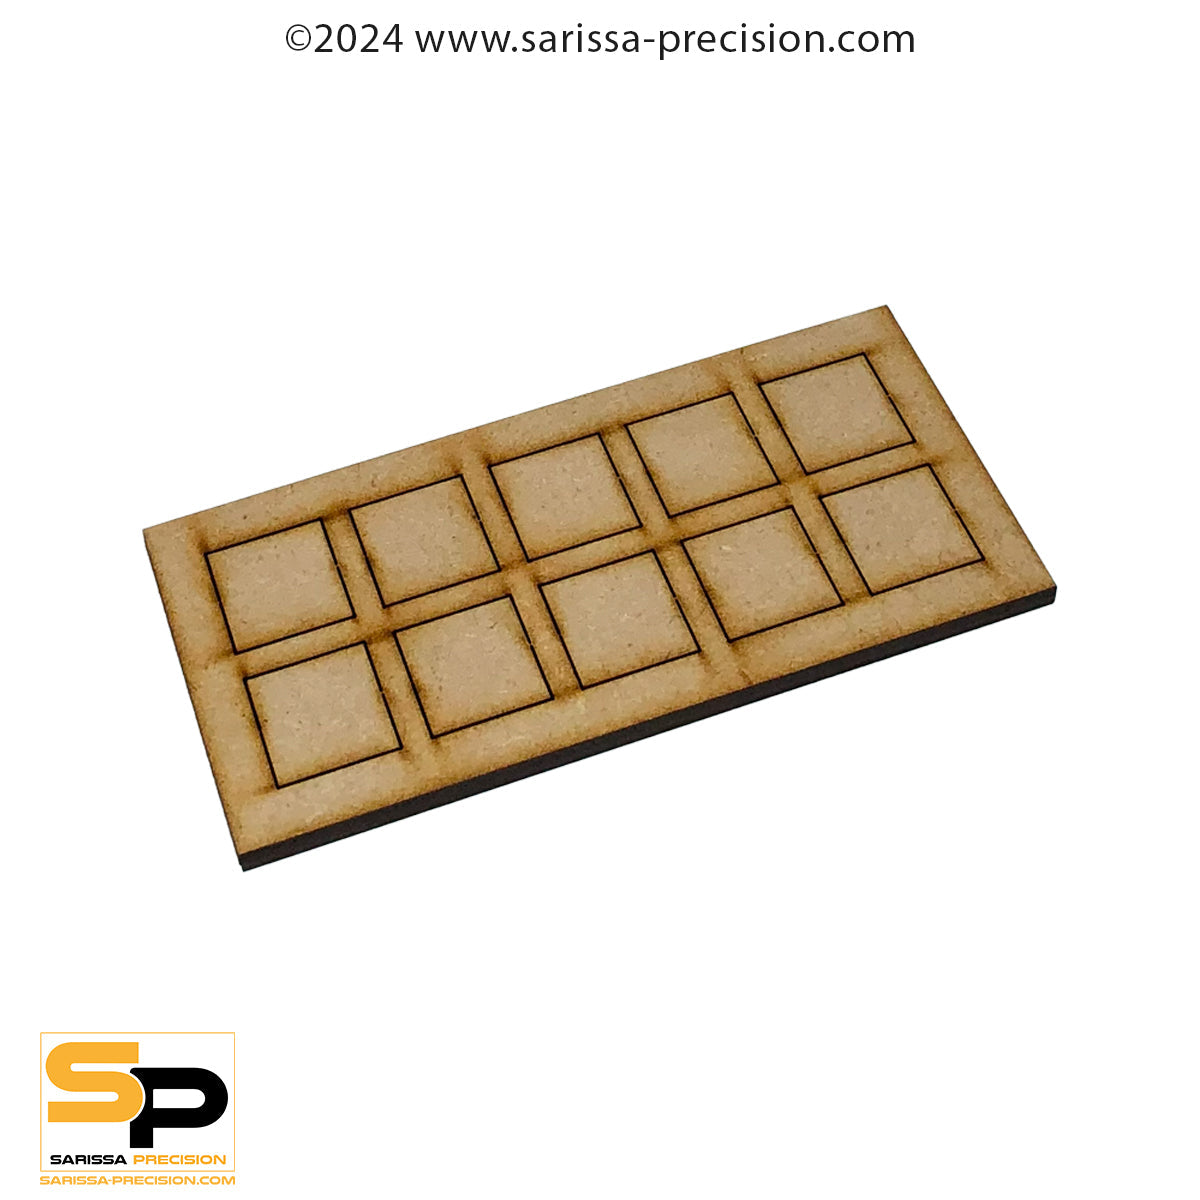 7x5 25x25mm Conversion Tray for 20x20mm bases